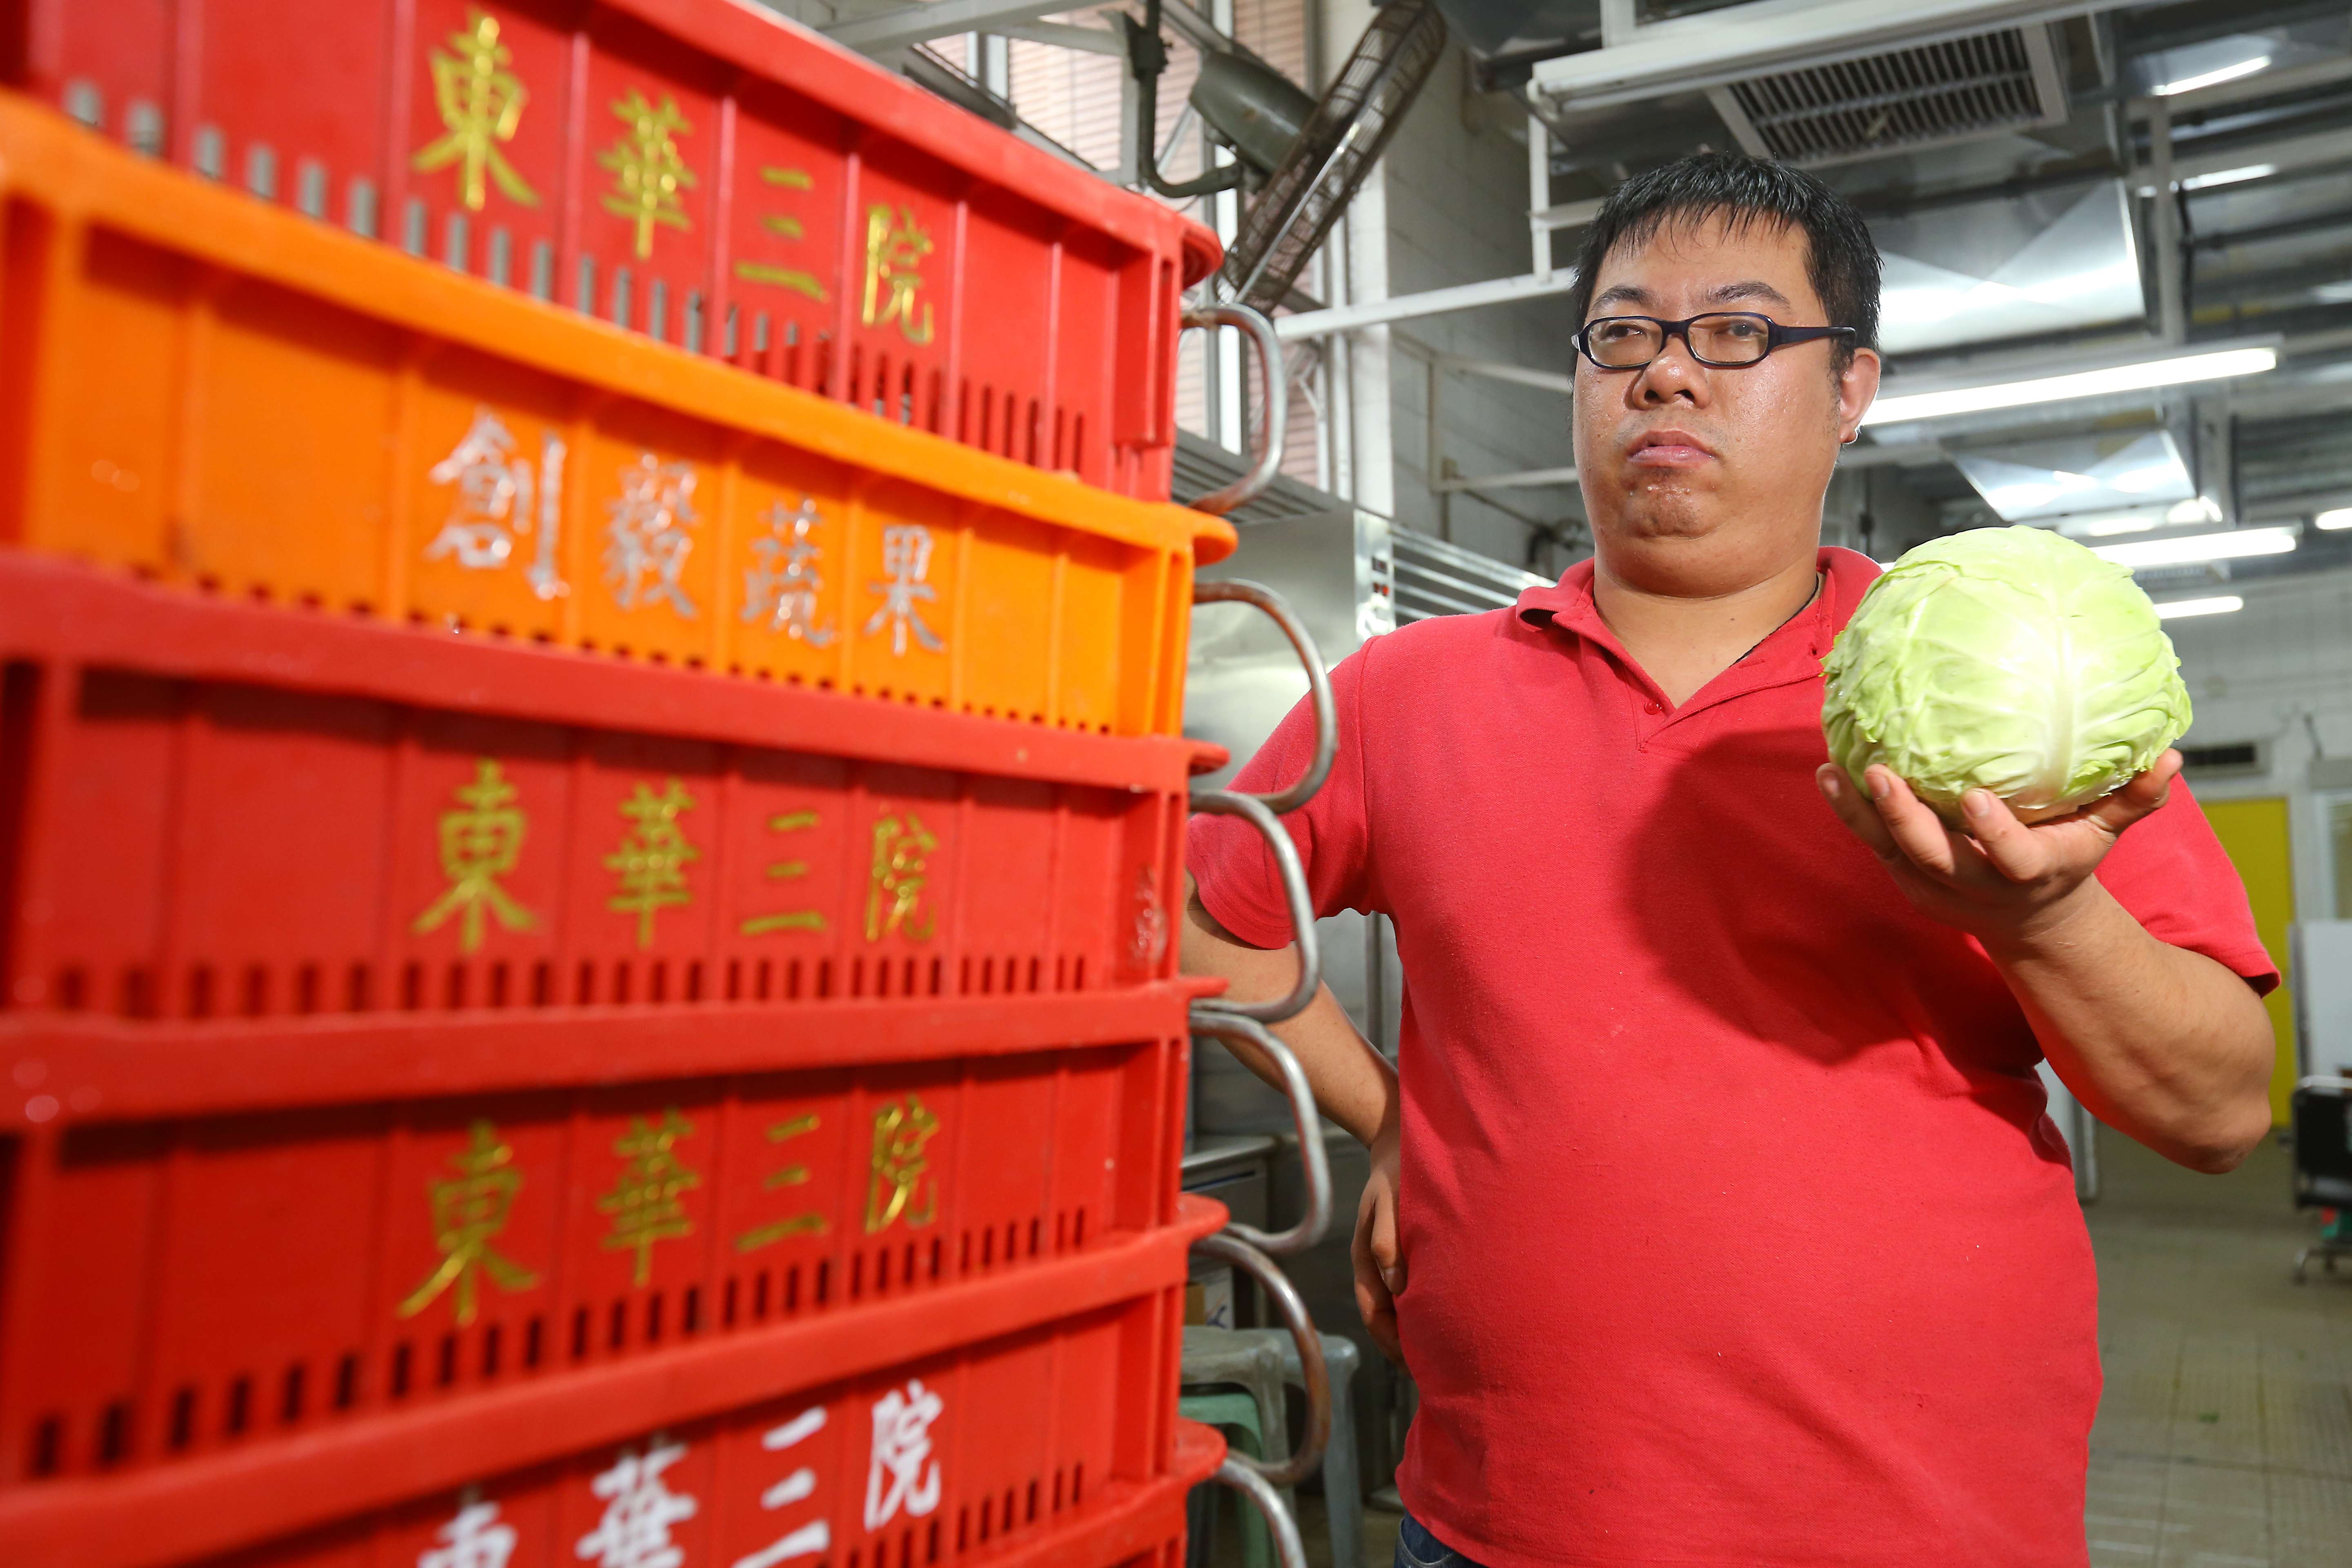 Lee Kwong-tak shows off a cabbage at the Jockey Club rehabilitation complex in Aberdeen. Photo: Edmond So